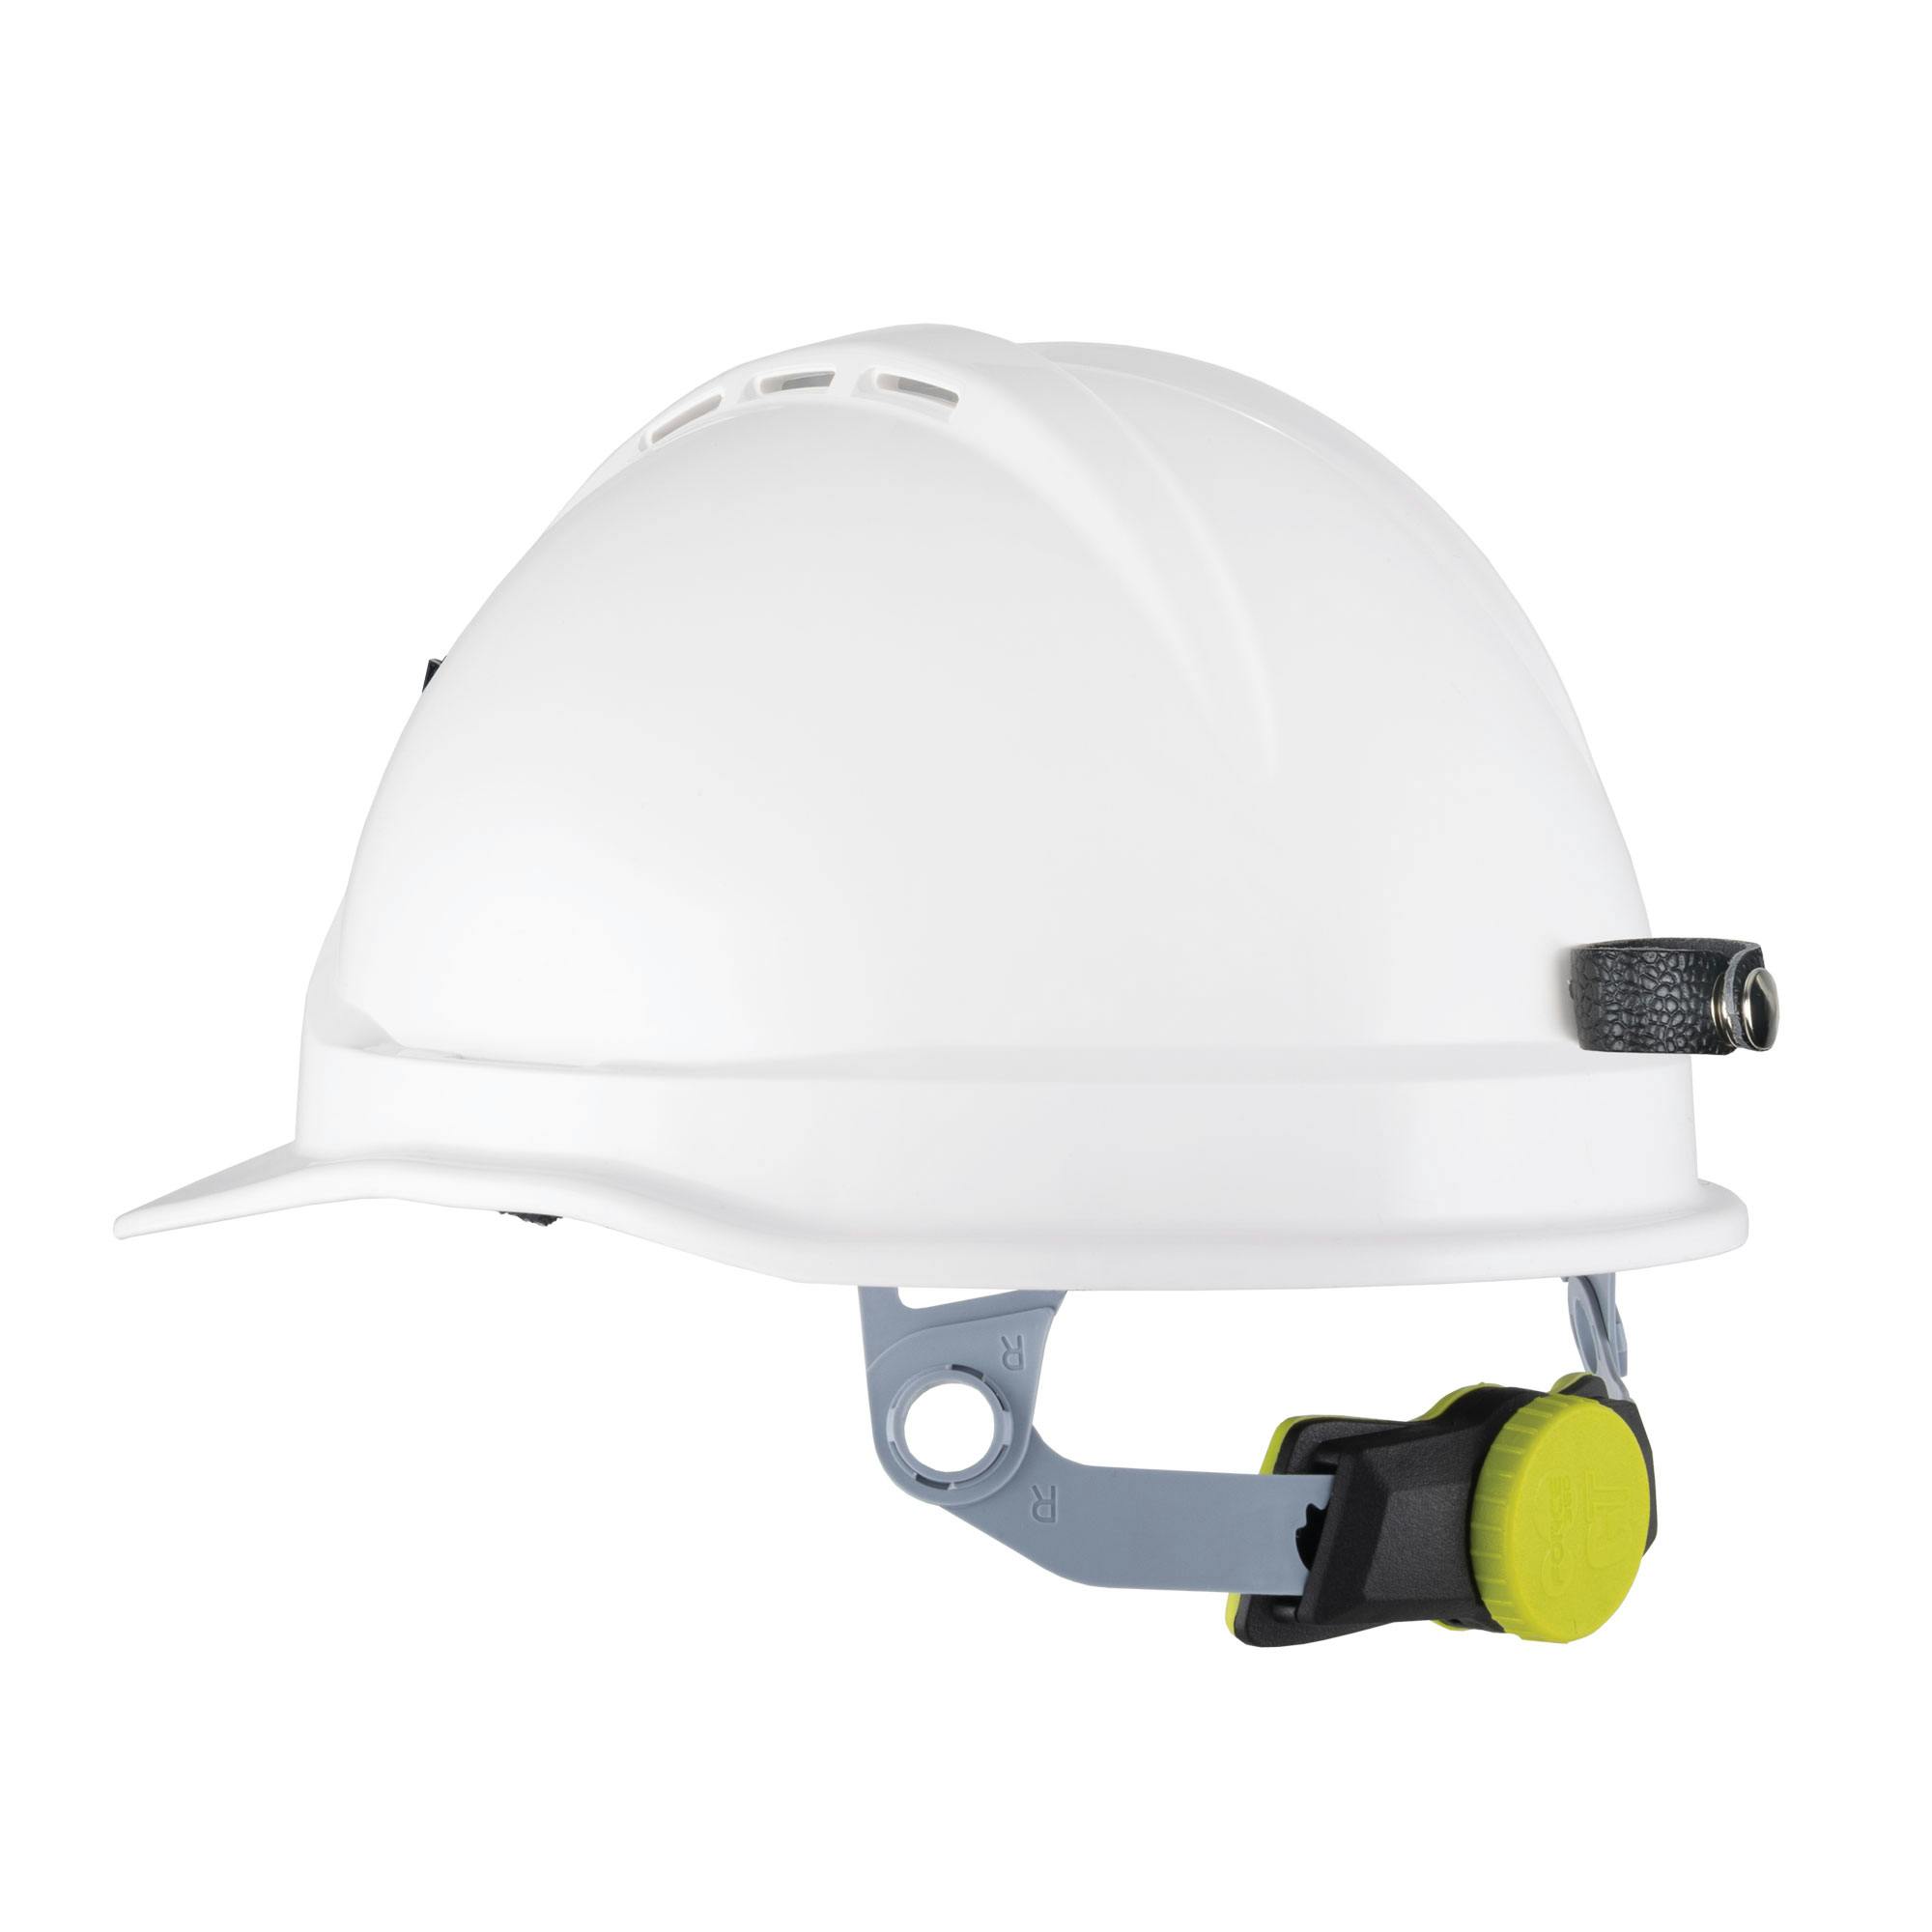 Force360 GTE7 ABS Vented Miners Hard Hat With Ratchet Harness, Type1 (White)_0